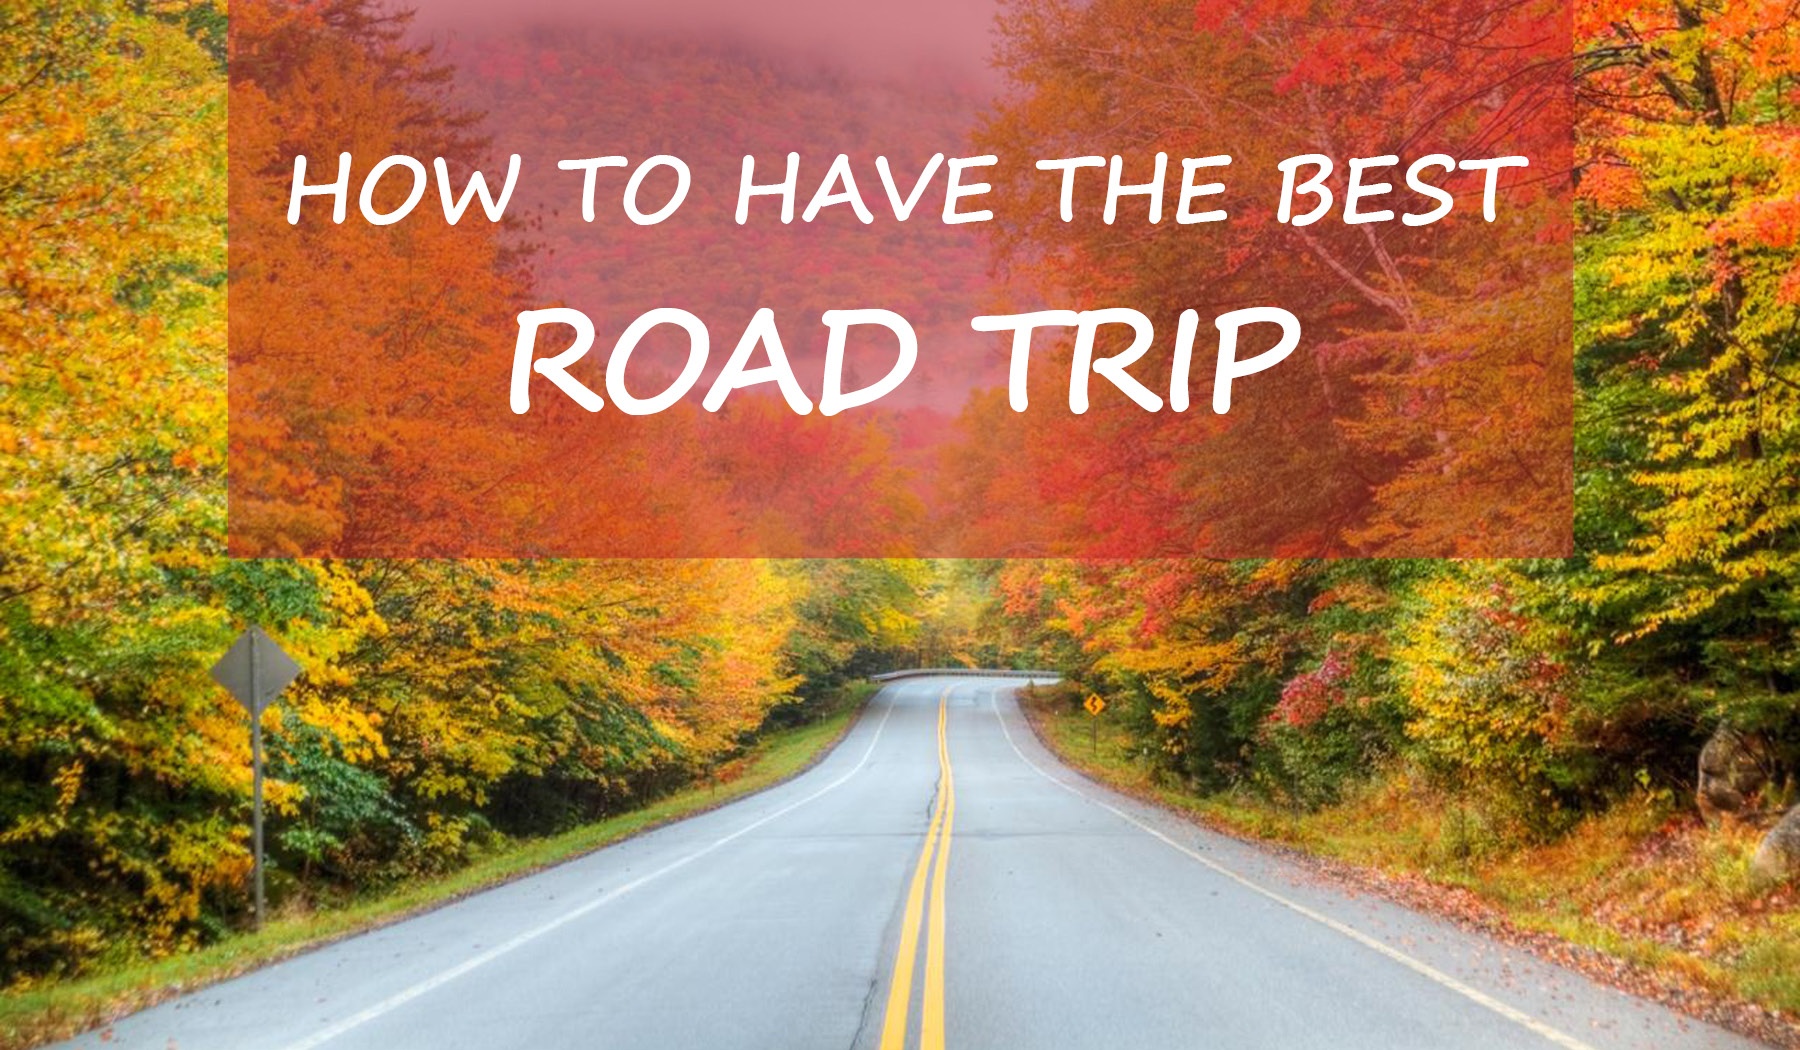 How to Have the Best Road Trip.jpg